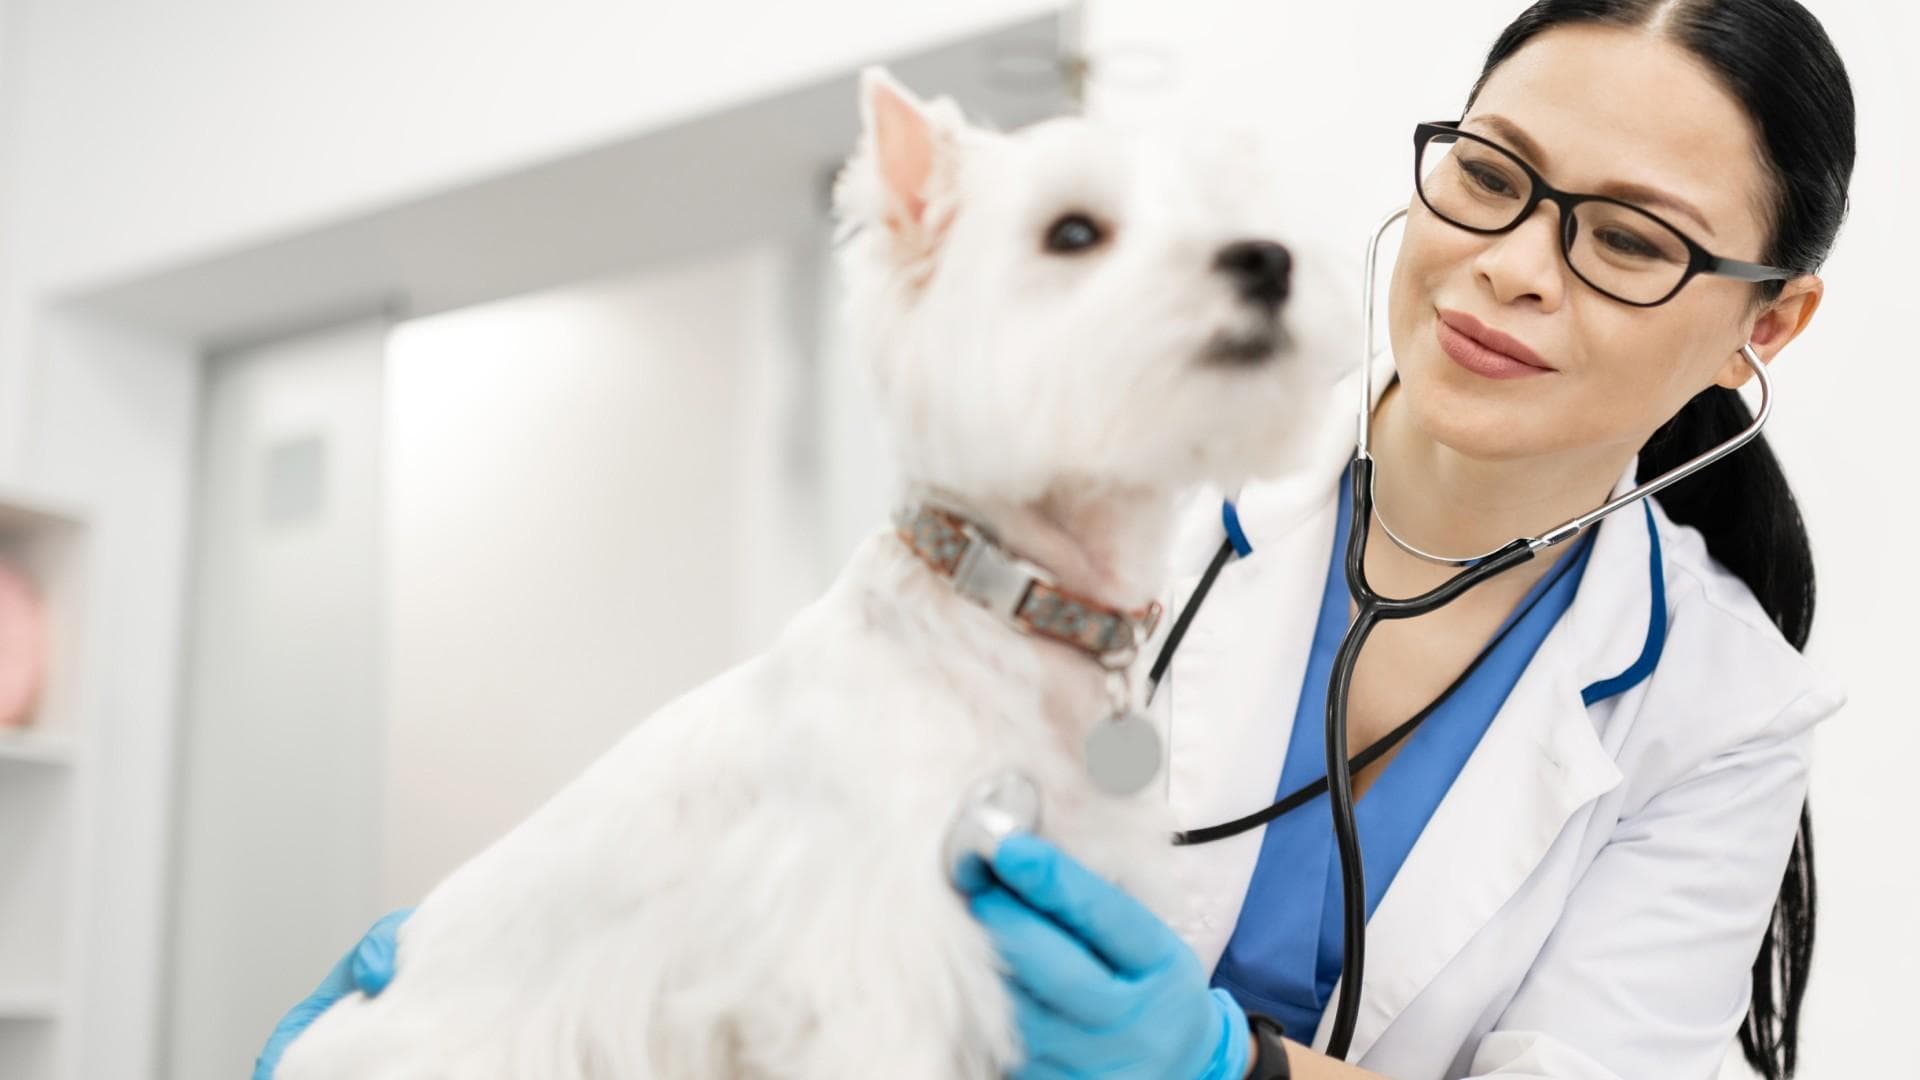 Veterinarian with Dog